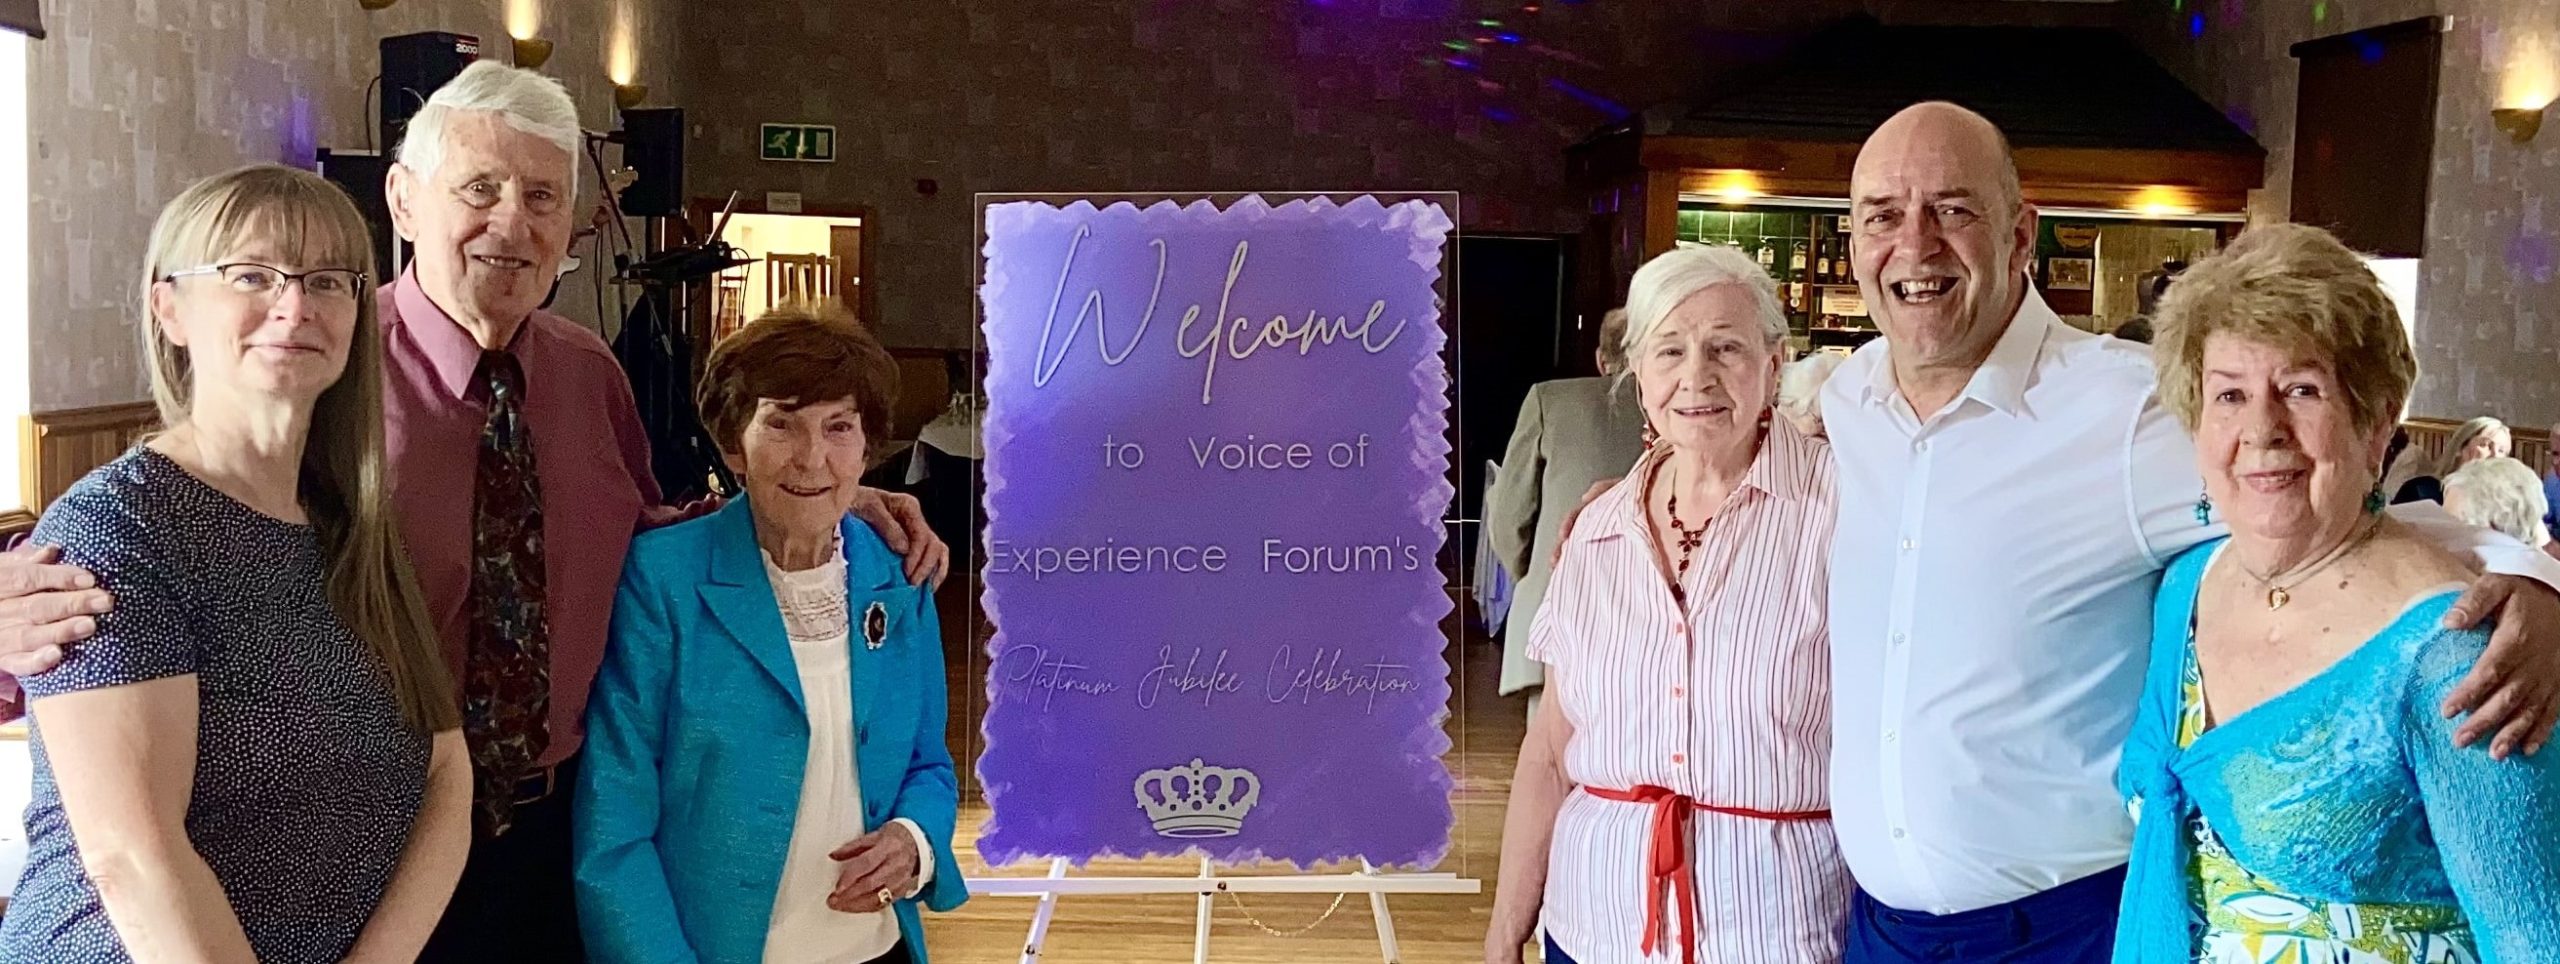 Voice of Experience Forum